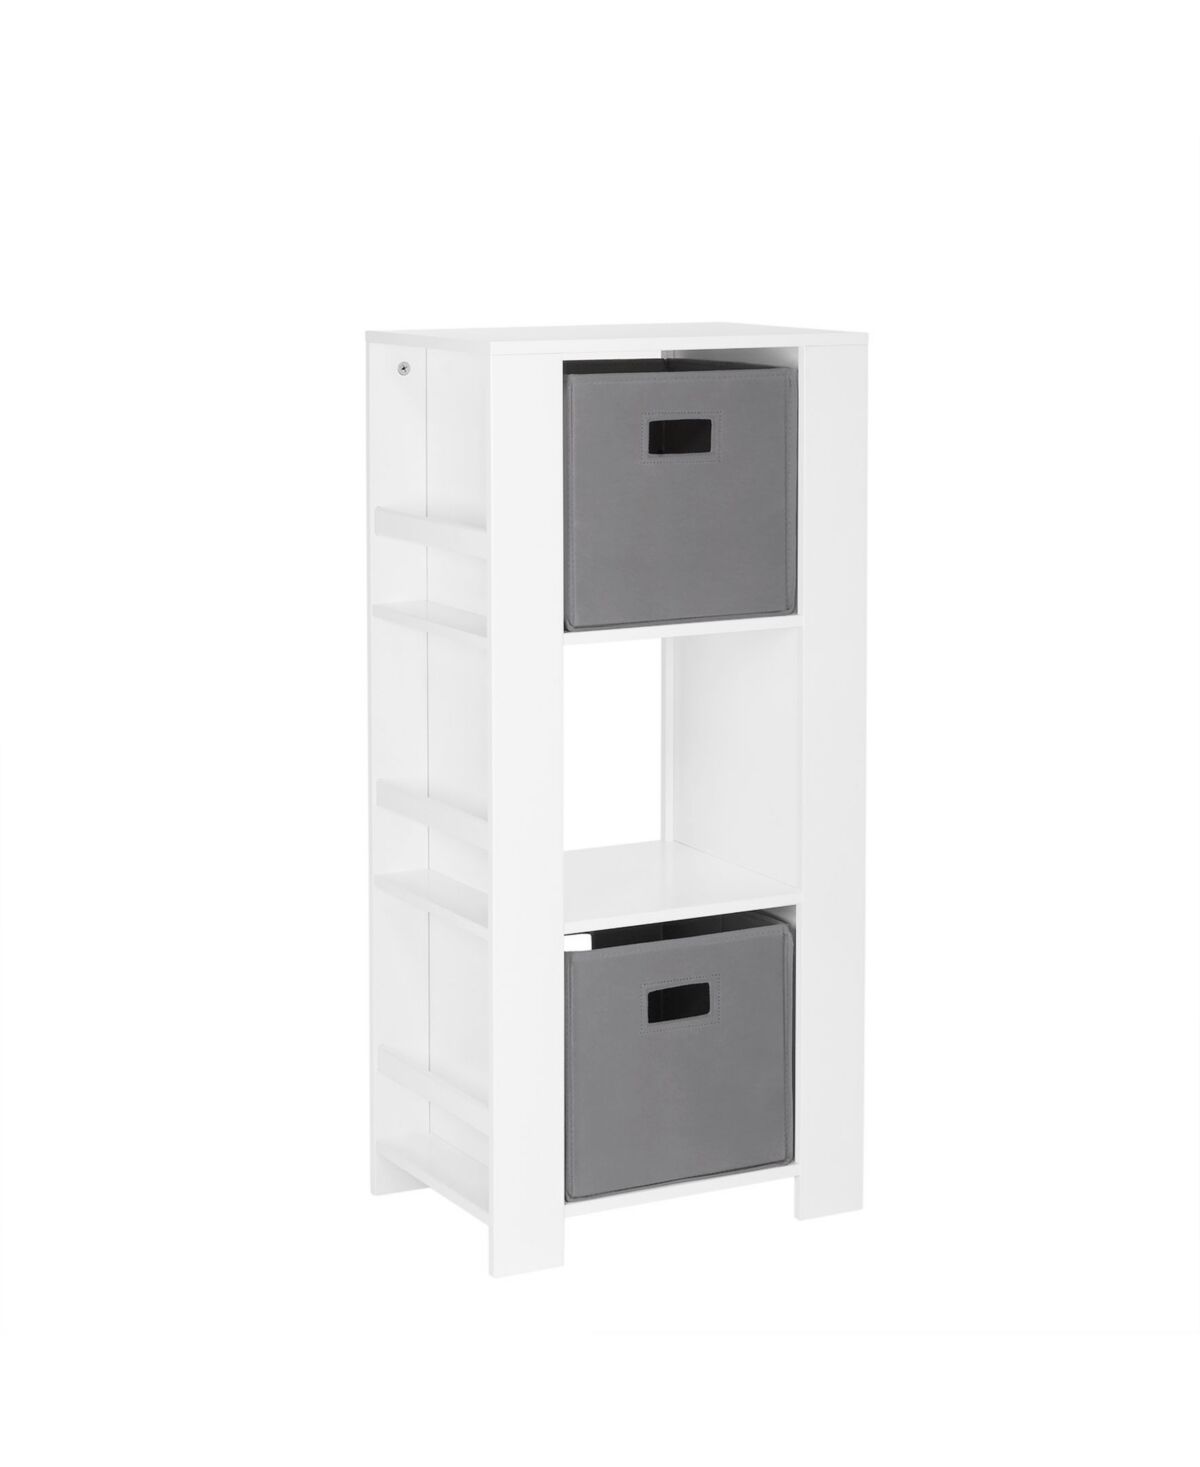 RiverRidge Home Book Nook Collection Kids Cubby Storage Tower with Bookshelves - Gray